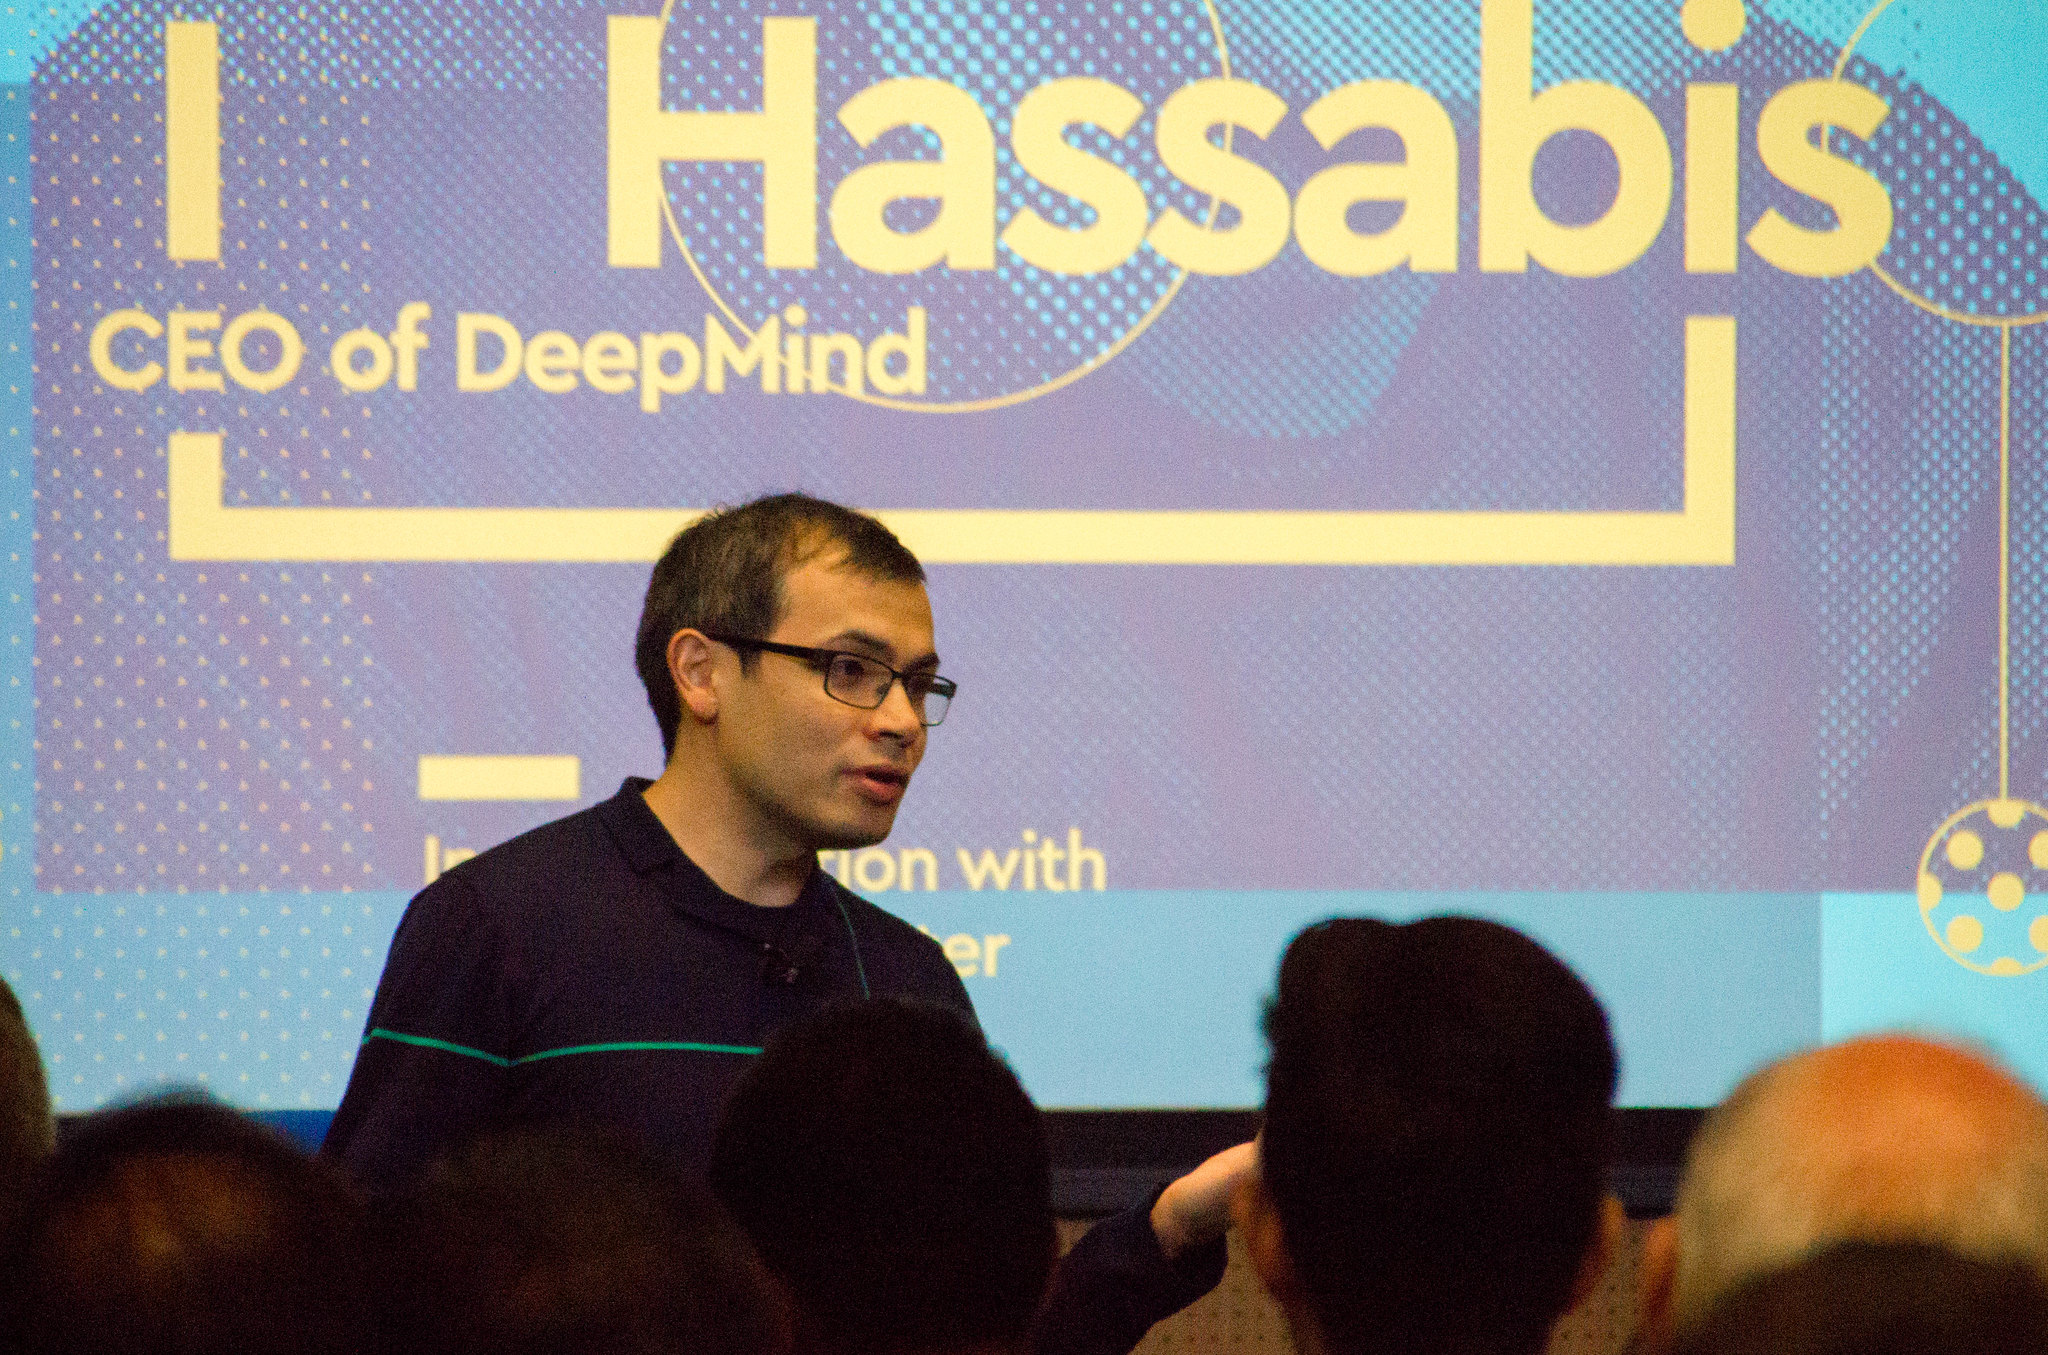 Deepmind chief doesn't see AI reaching its limits anytime soon - but still warns against hype